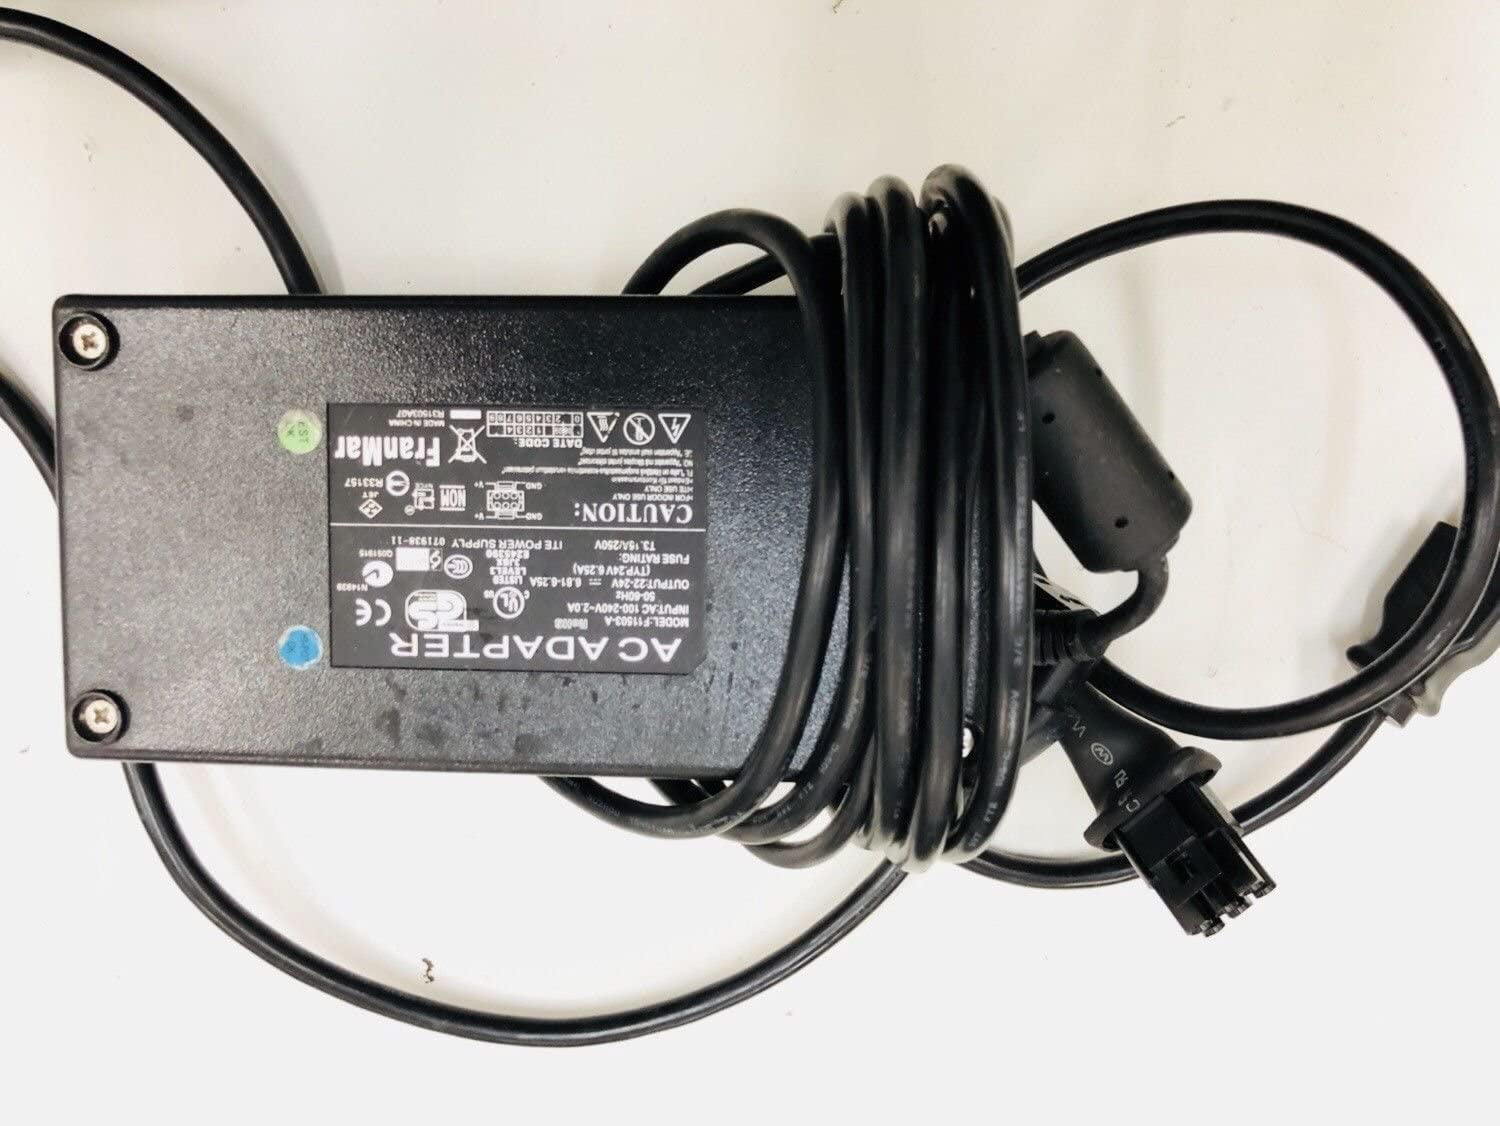 Octane Fitness Pro 4700 Touch Elliptical AC Adapter Power Supply 12v 112584-001 